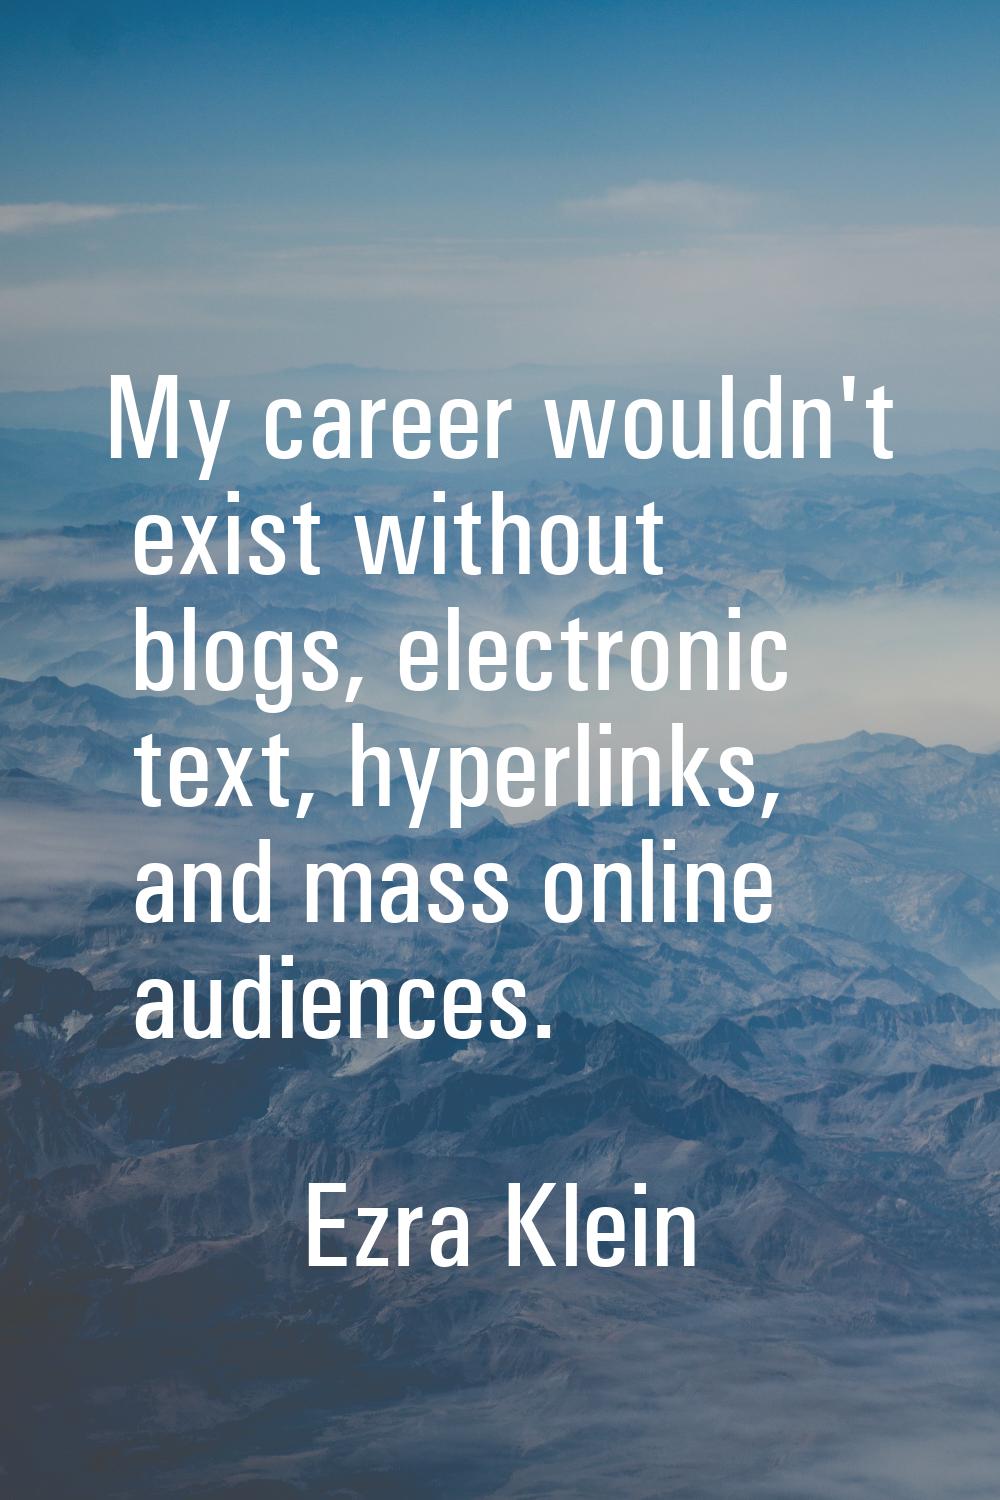 My career wouldn't exist without blogs, electronic text, hyperlinks, and mass online audiences.